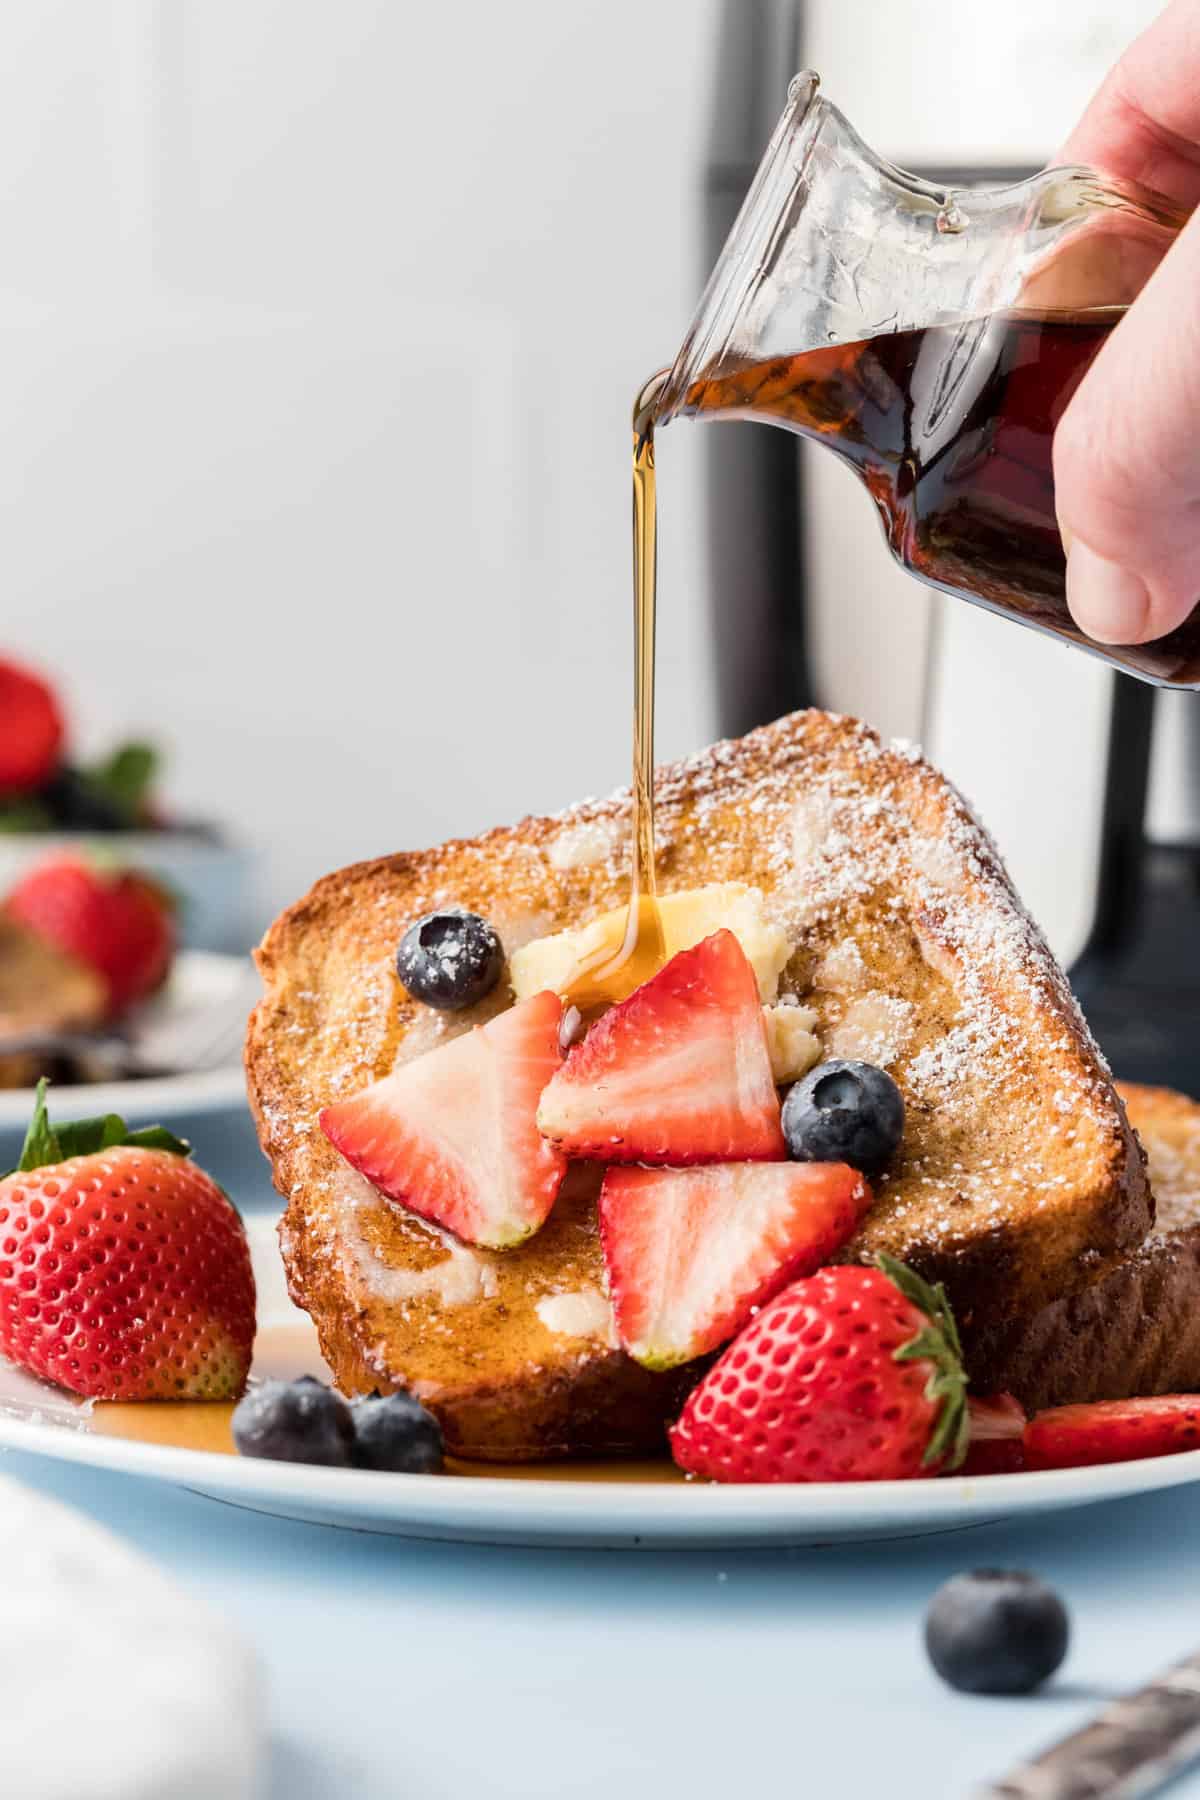 Syrup is being drizzled on top of a serving of french toast with berries.